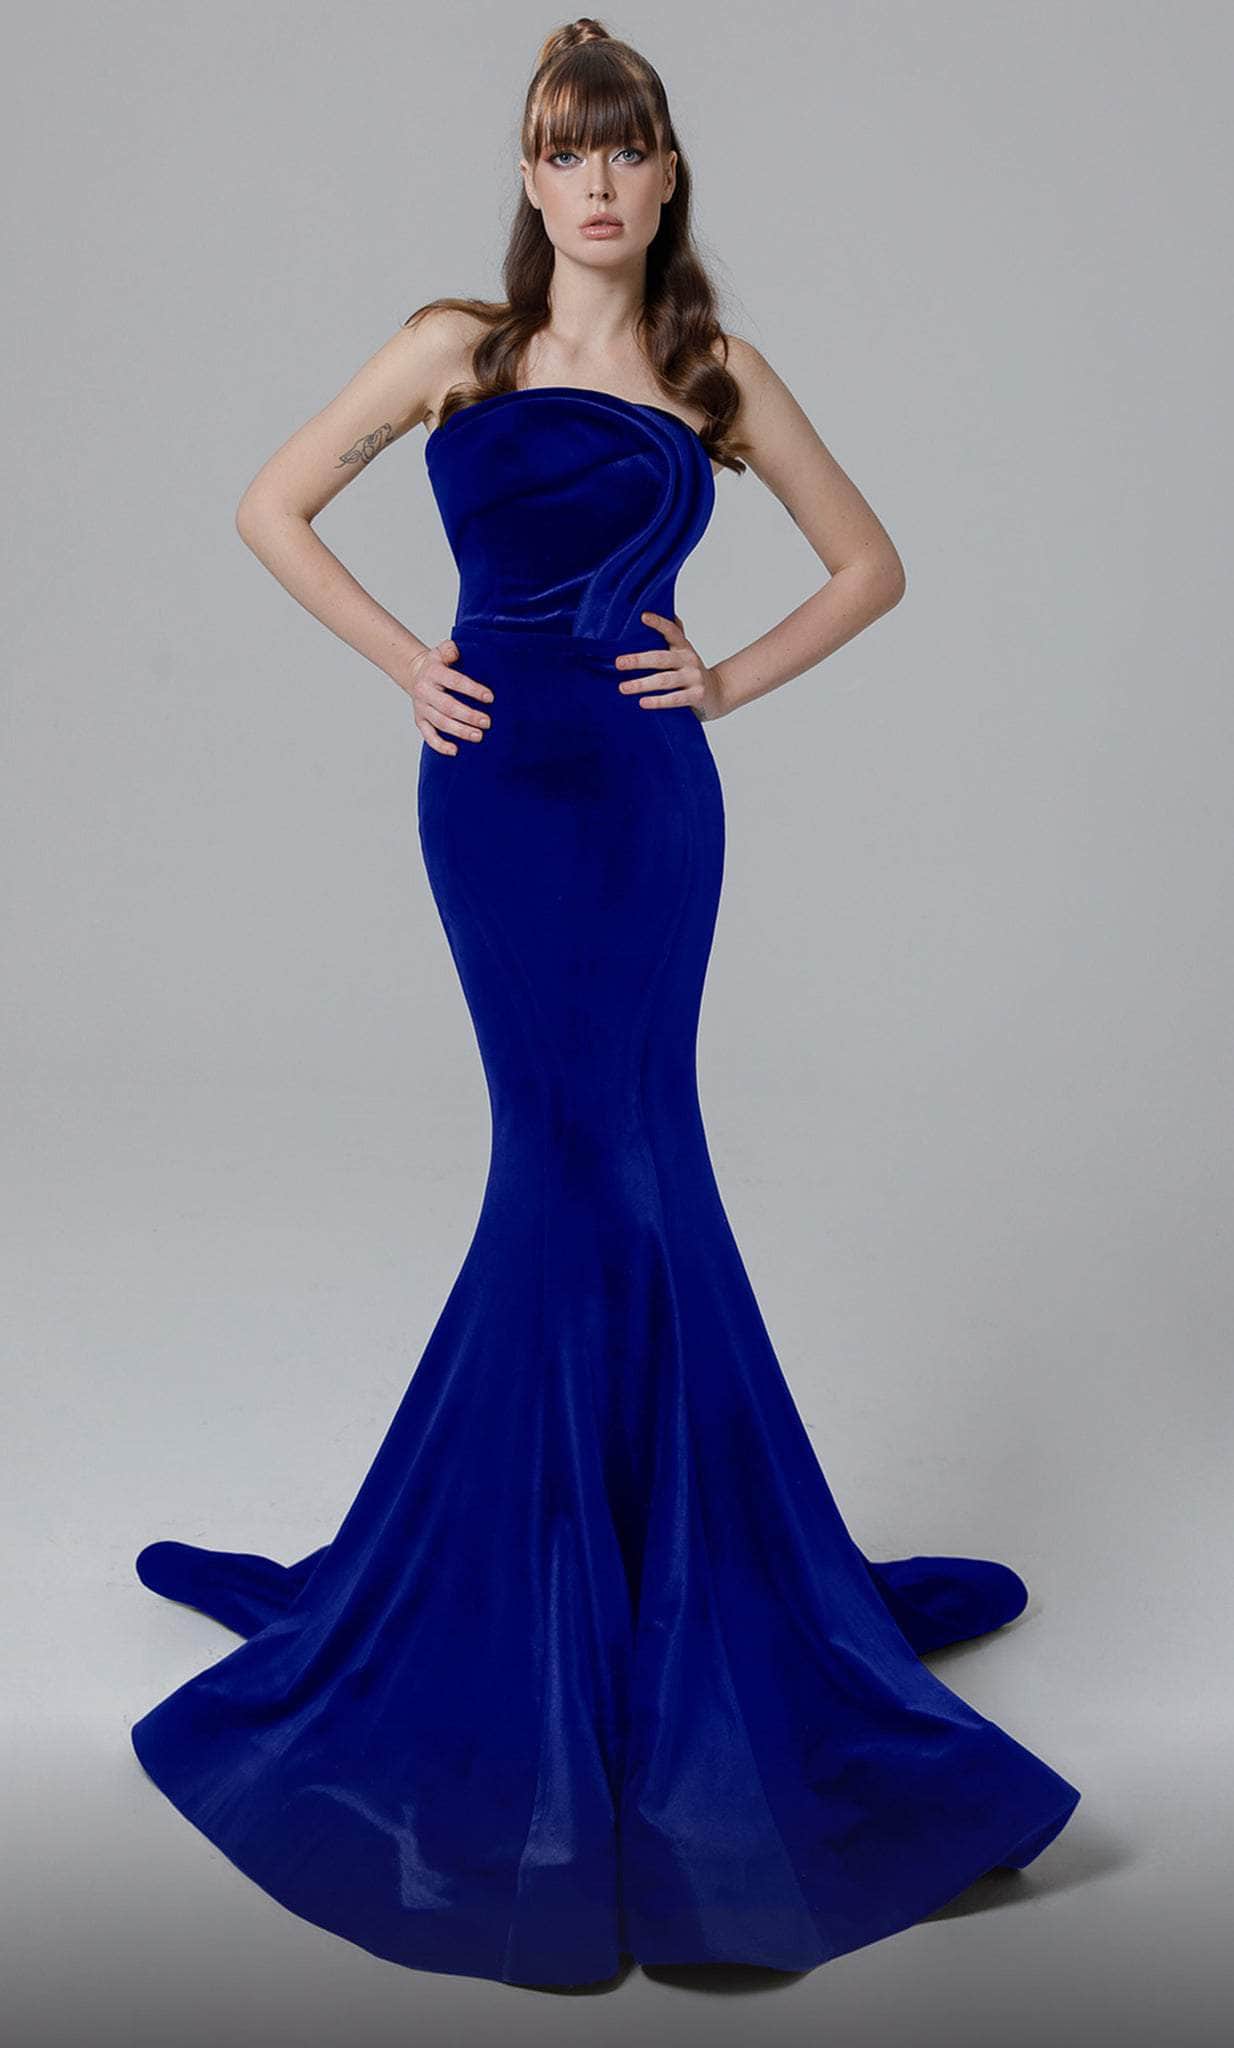 MNM Couture N0450 - Strapless Velvet Evening Gown Prom Dresses 4 / Royal Blue